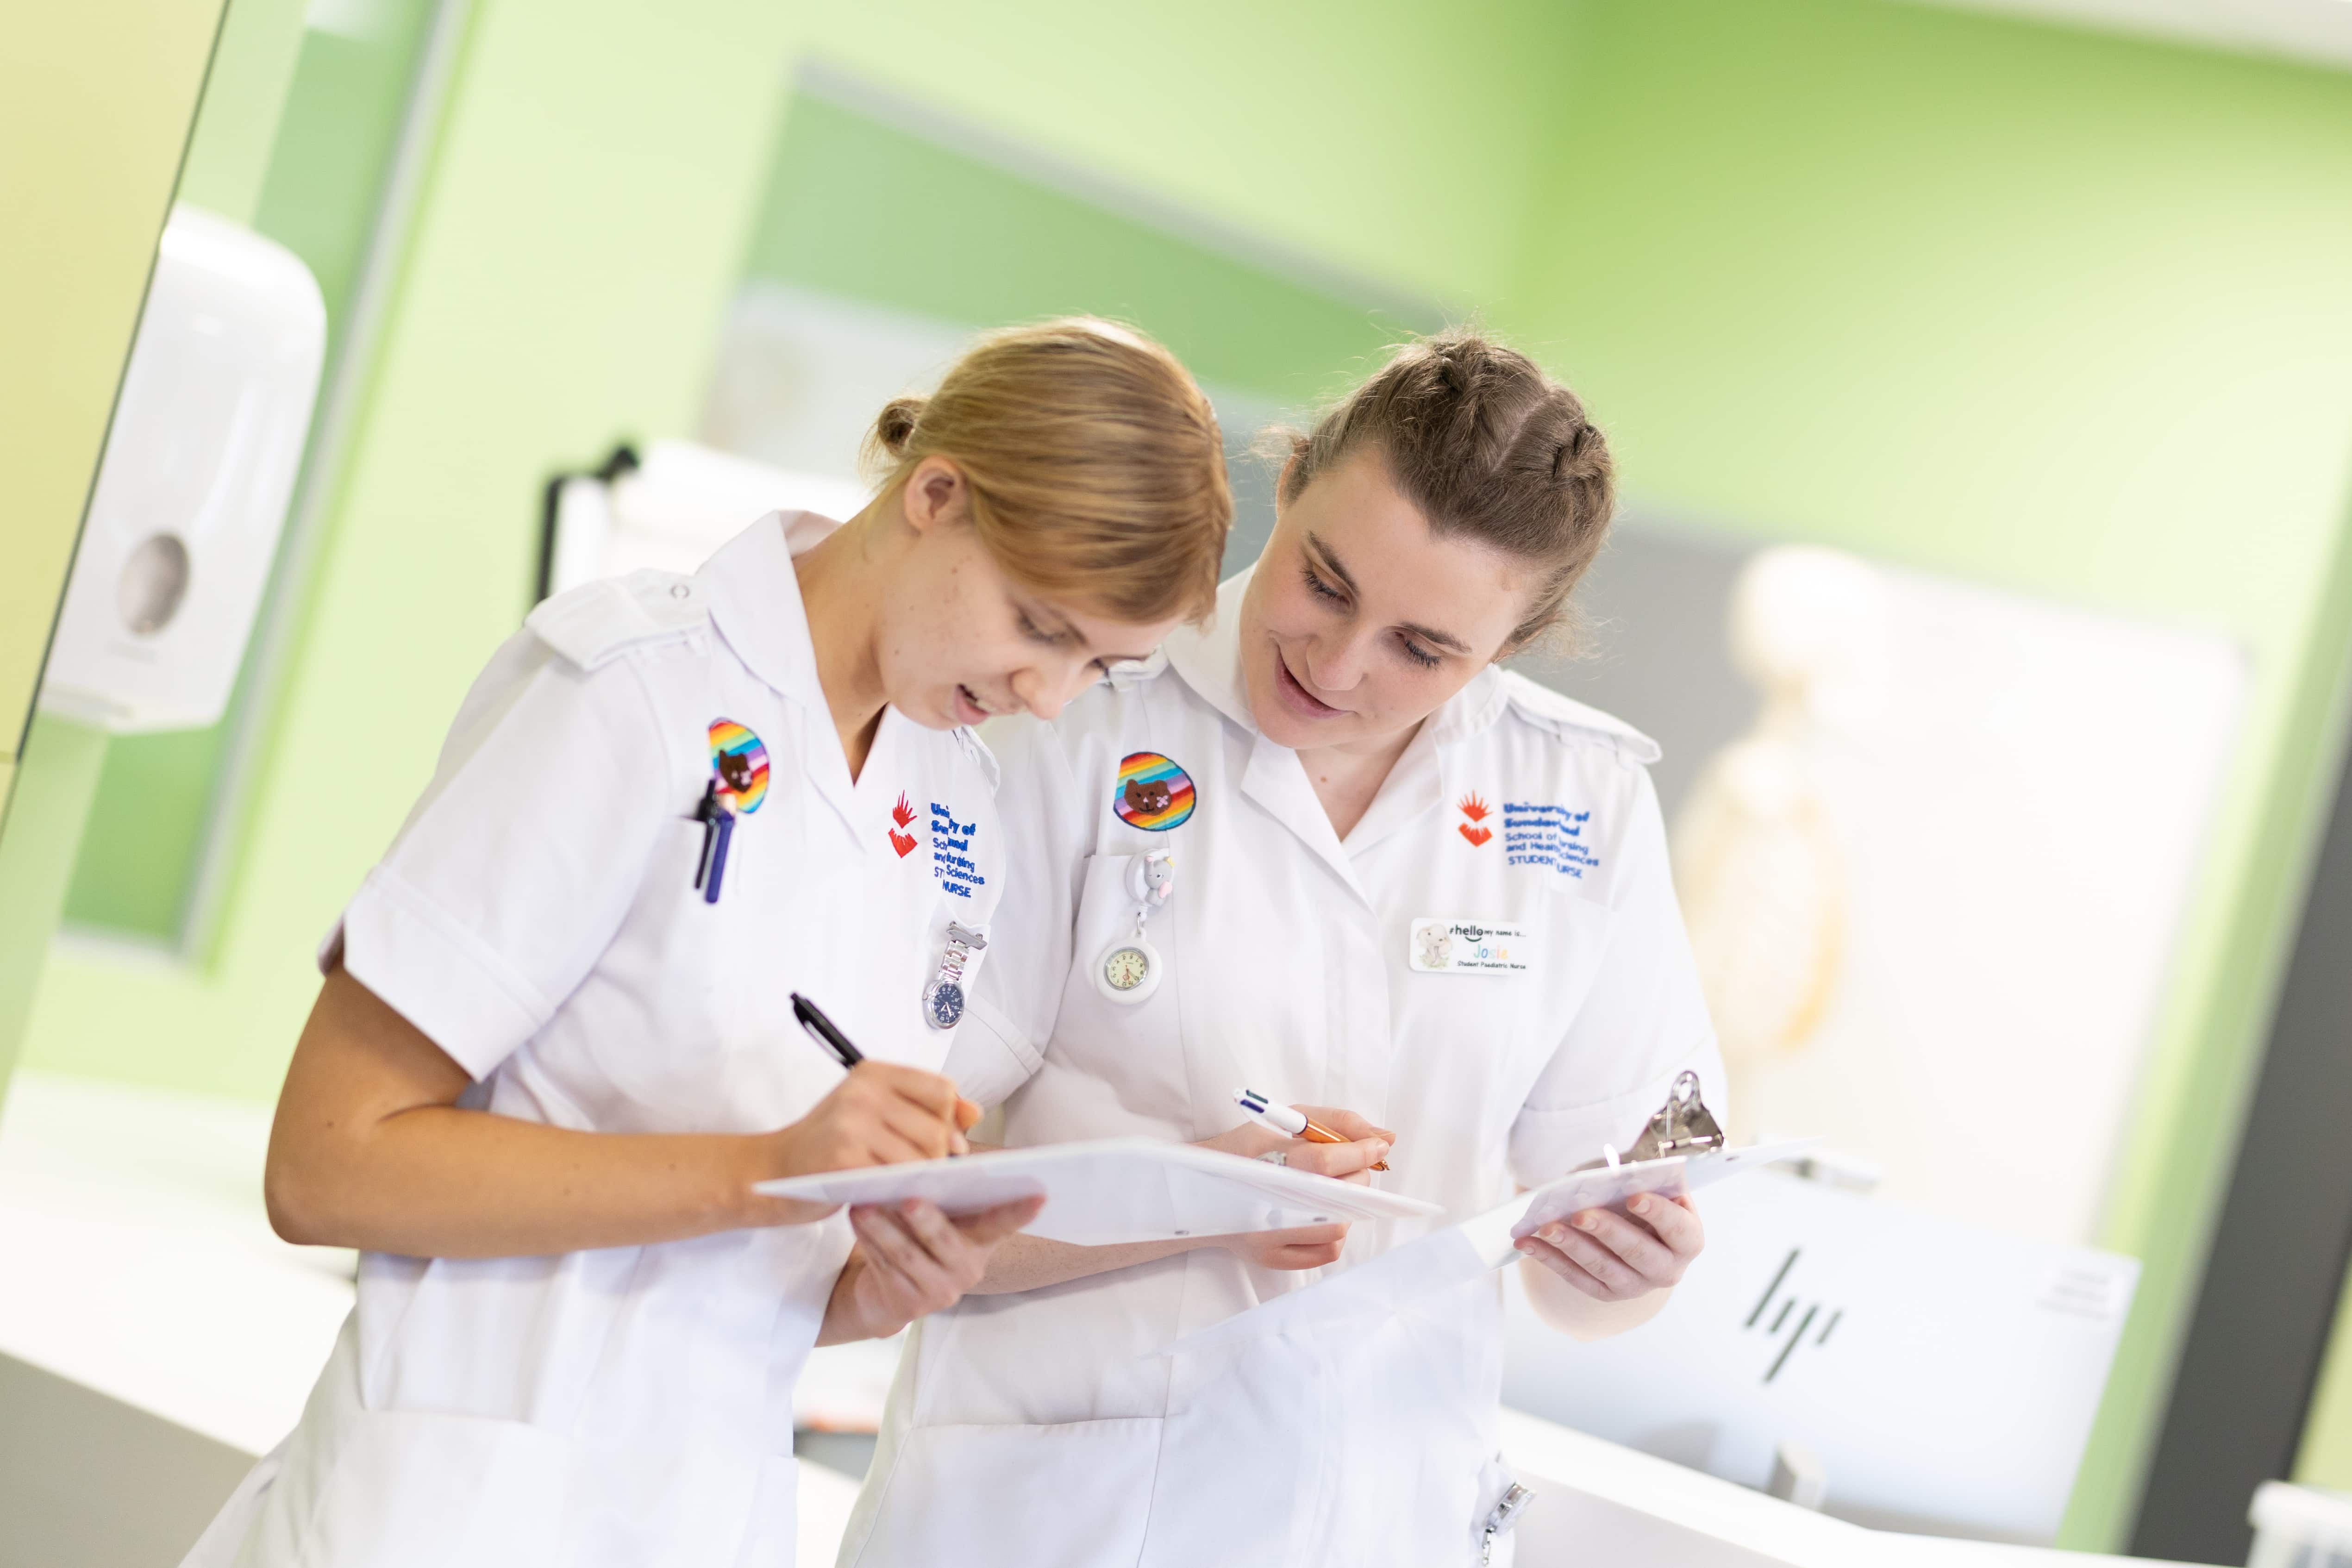 Two student nurses in uniform looking at a clipboard